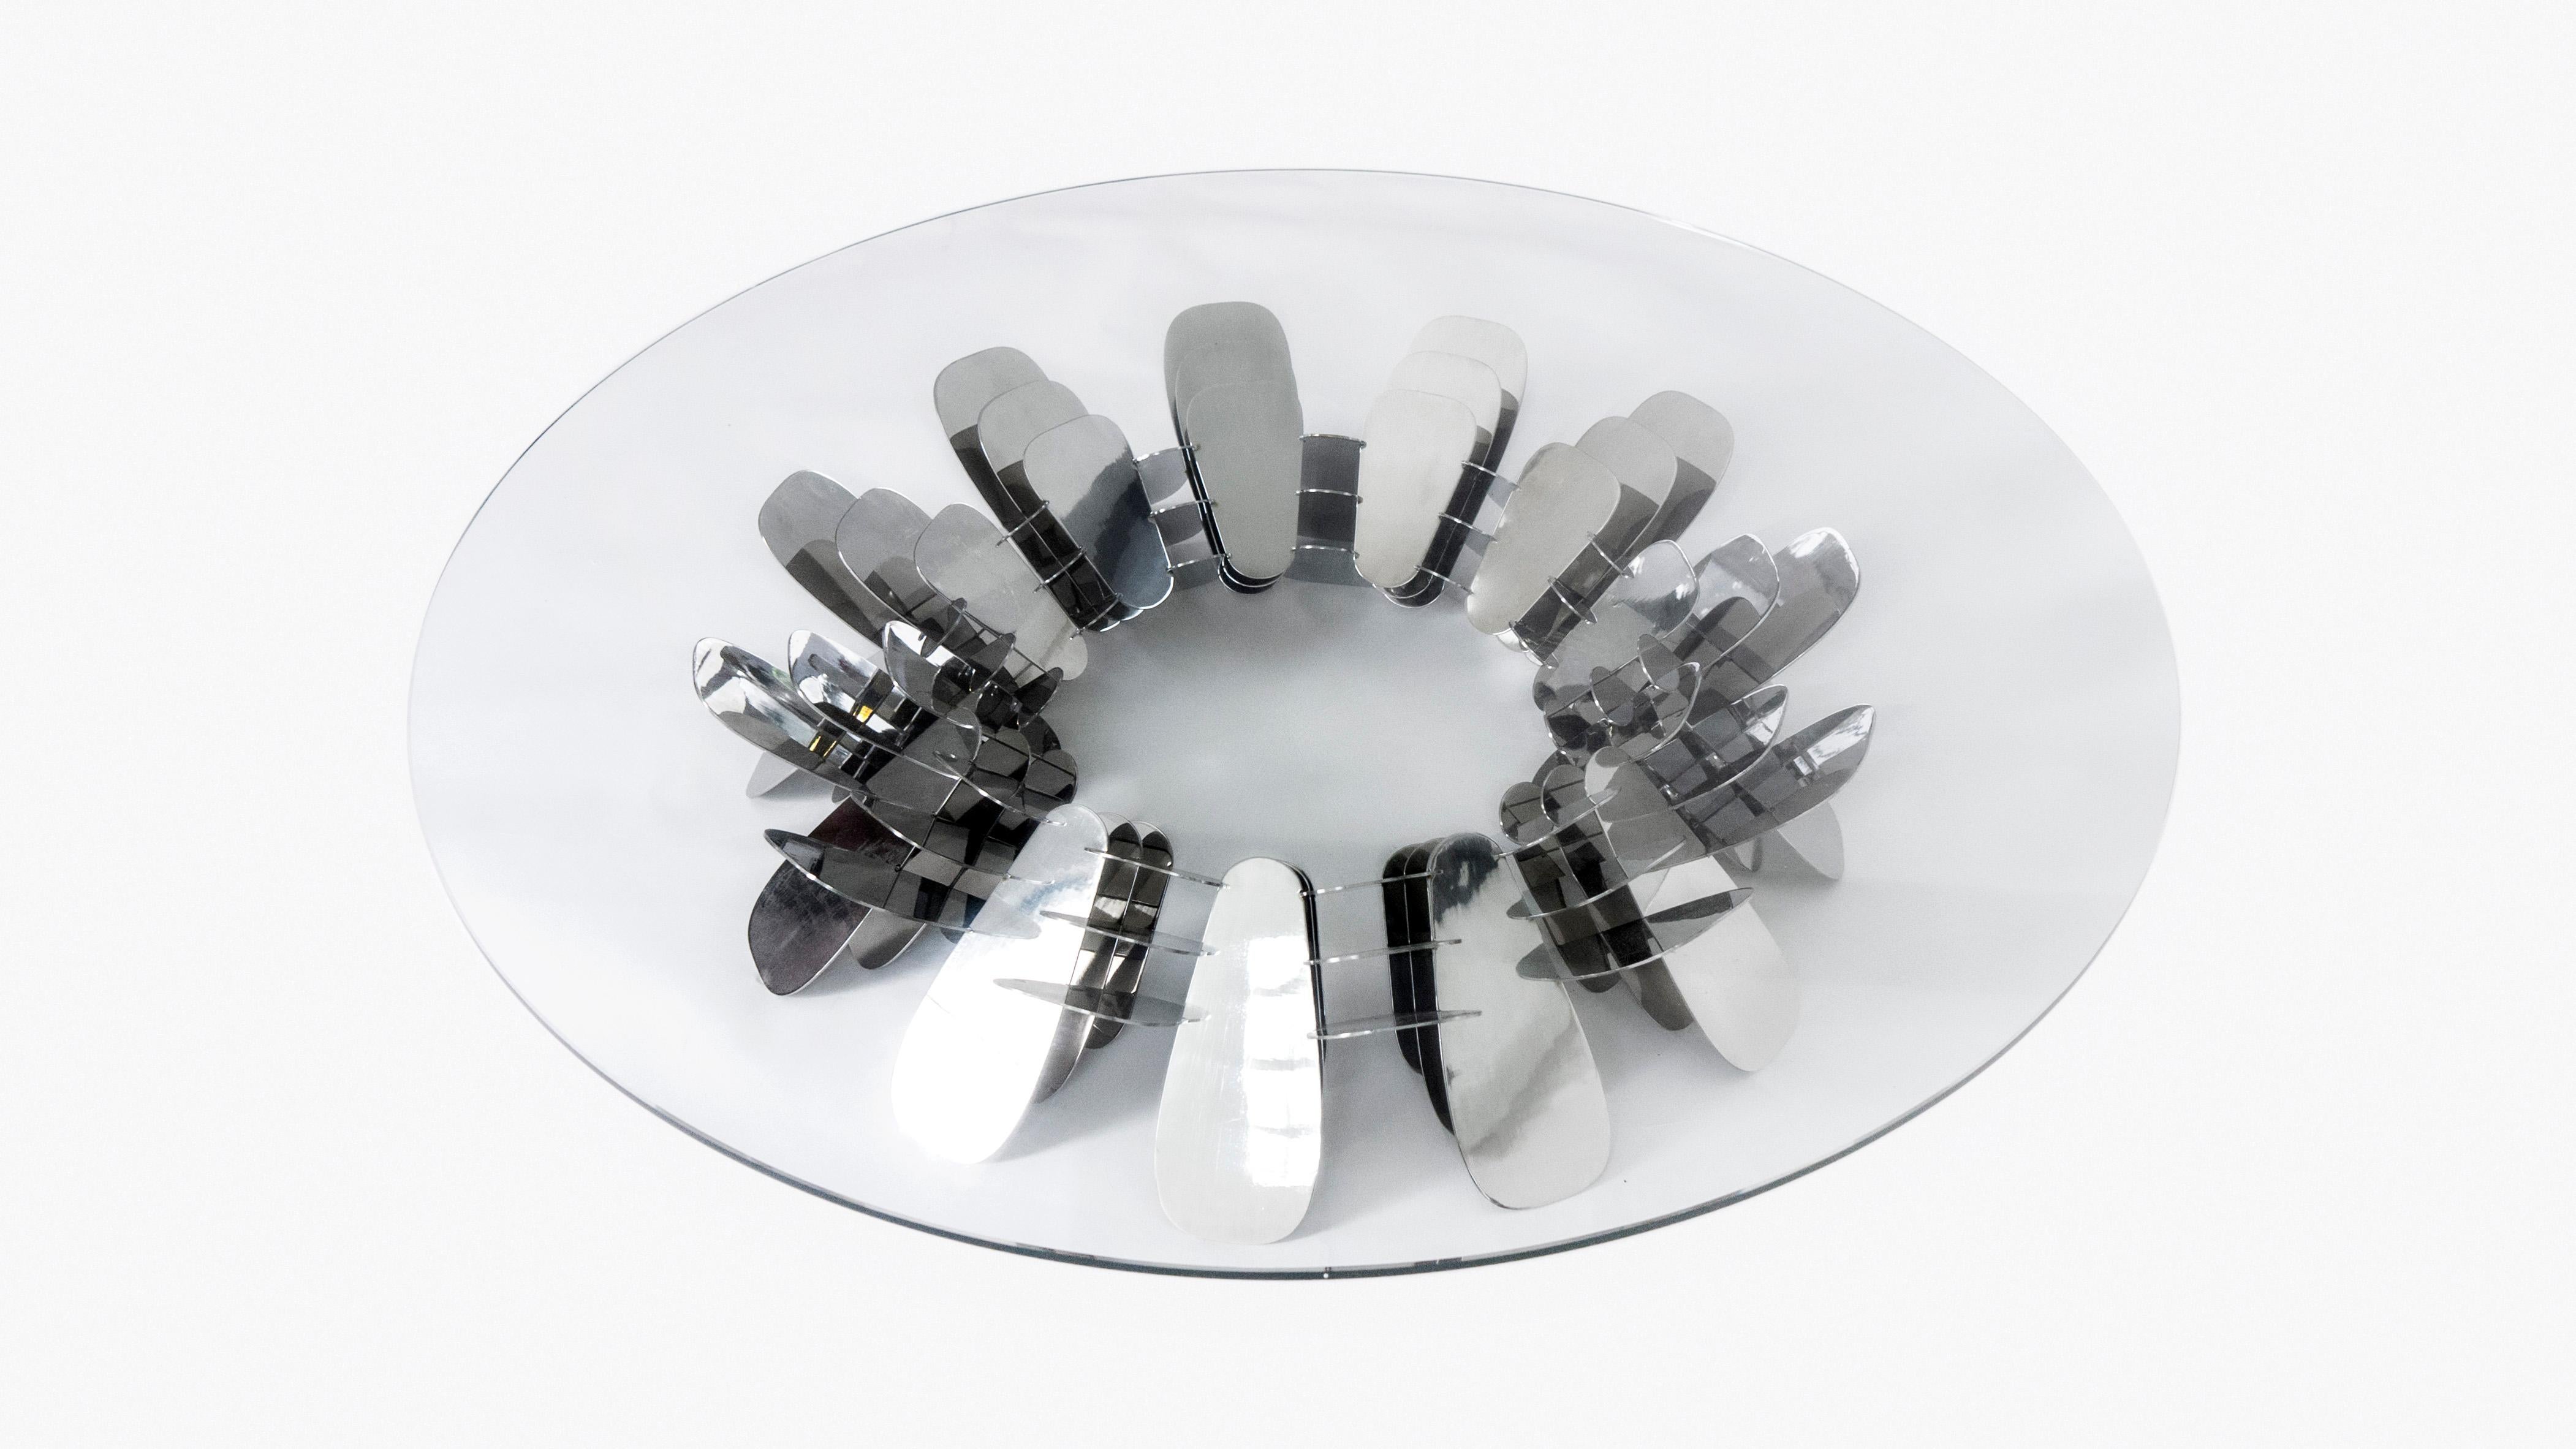 The “Narciso Table” is made of a modular structure of stainless steel petals of three different sizes, symmetrically welded around a central axis conforming a perfect circle.

The geometric system of the “Narciso” table is based on a dodecagonal